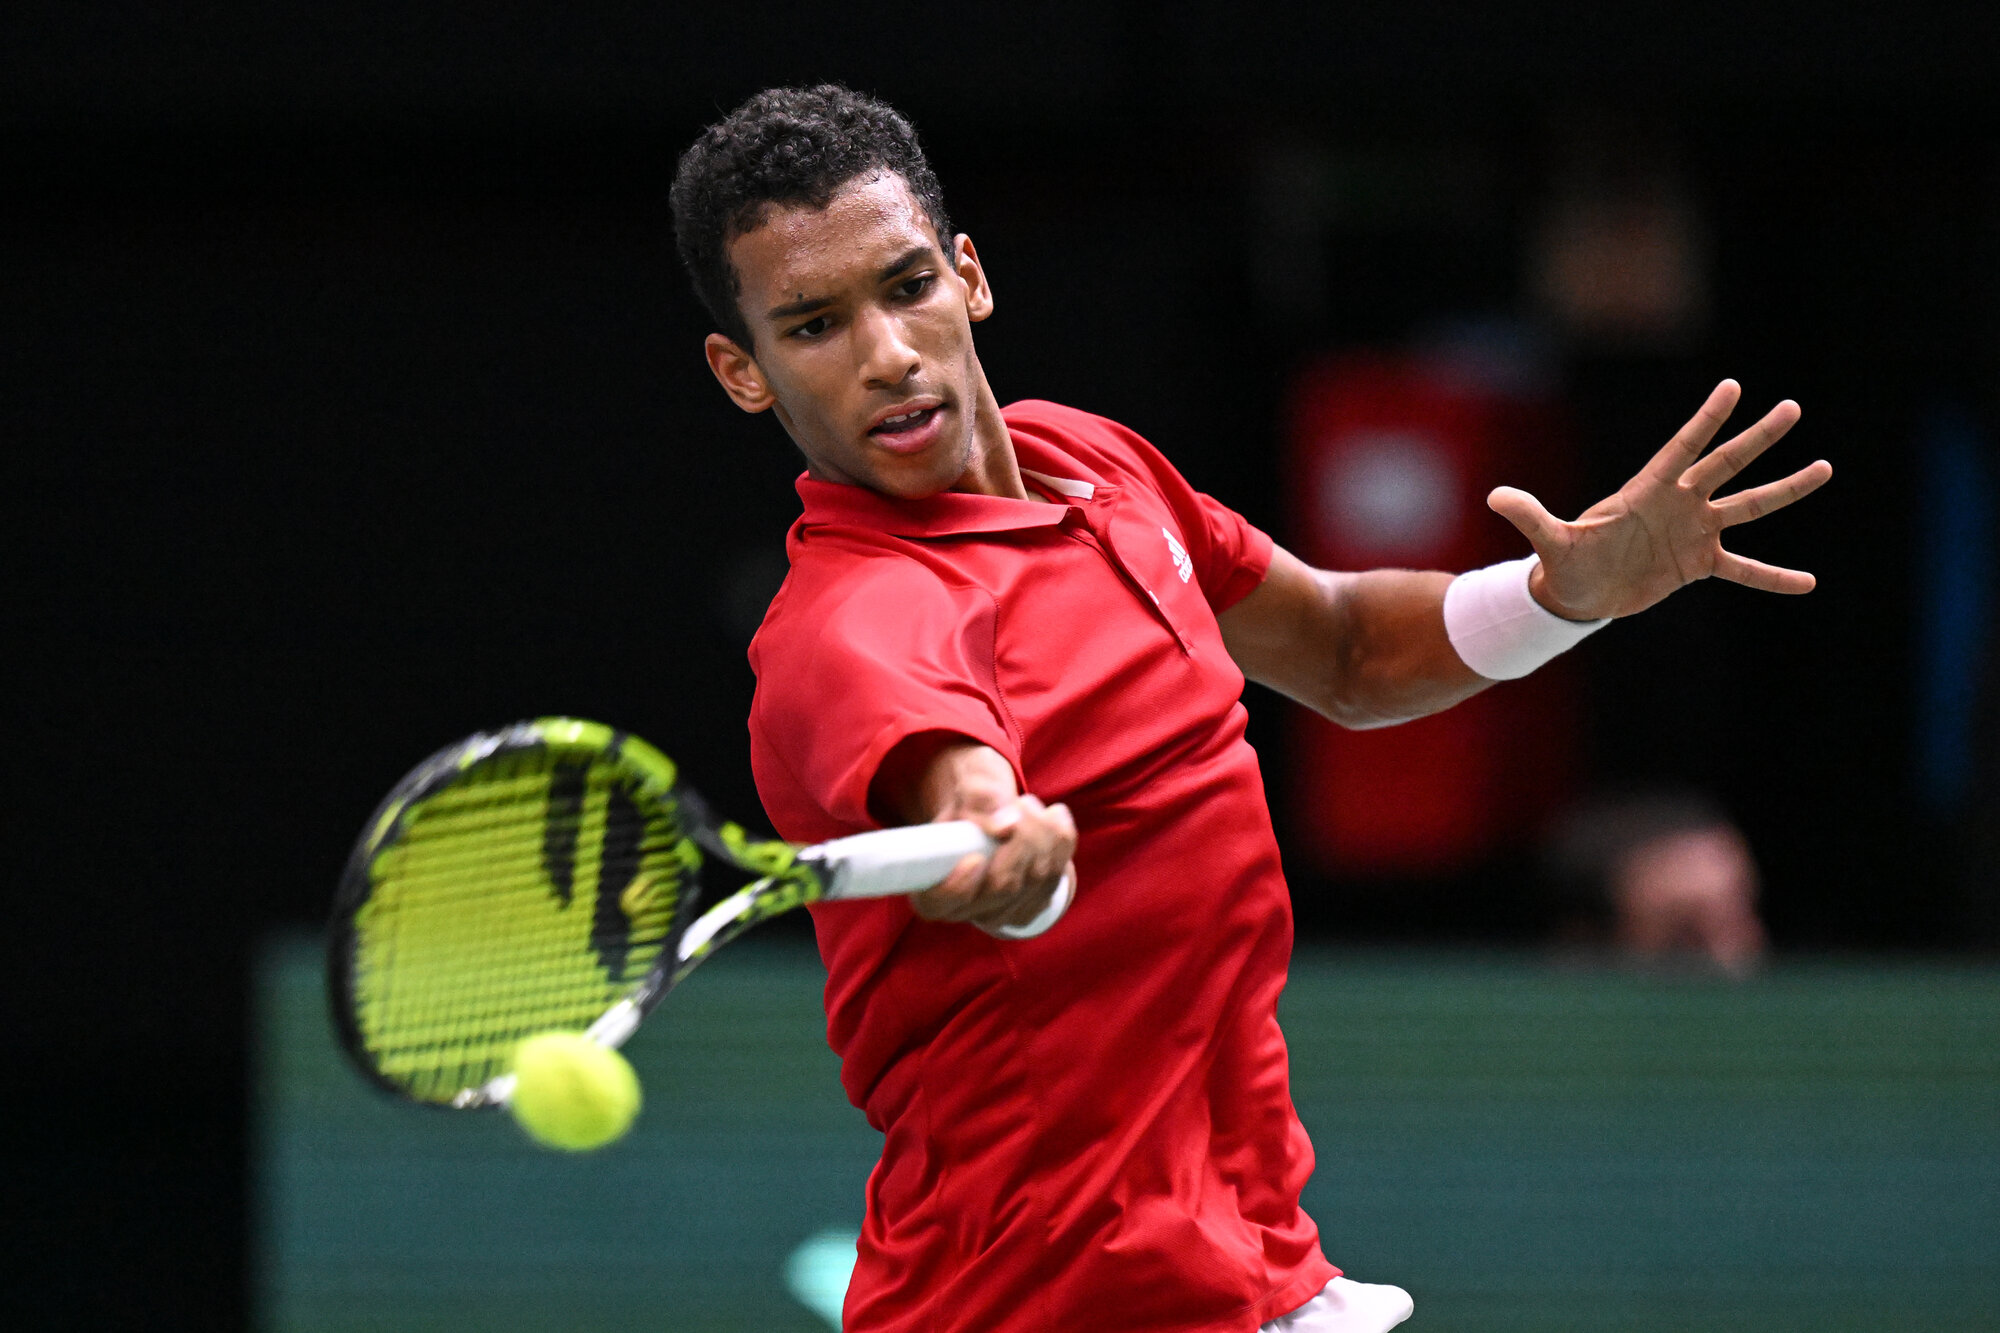 Auger-Aliassime hits forehand